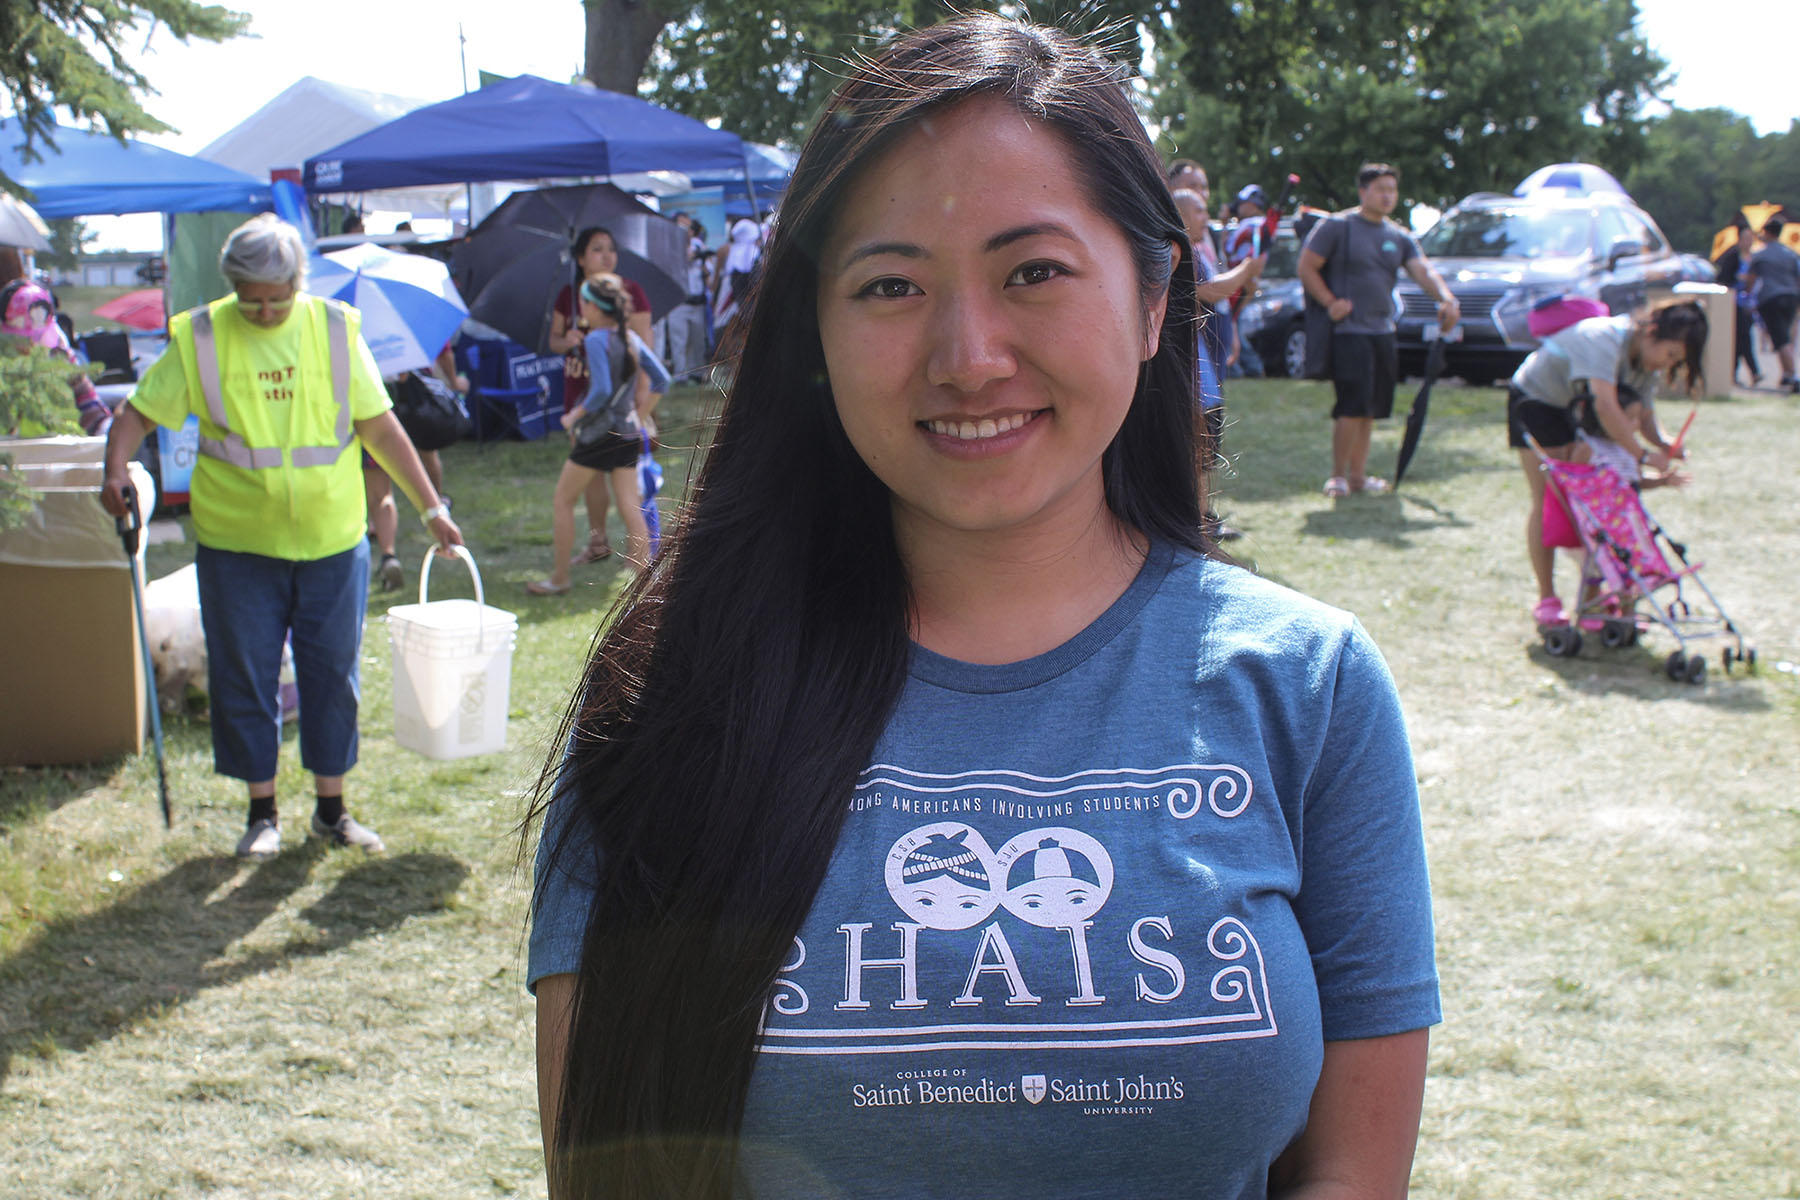 Beth Vang is a student at the College of Saint Benedict and Saint John's University majoring in communications. She said in the Hmong culture there is a difference between young and old voters. Sometimes young people are more likely to move away from certain traditions. (Phillip Jackson/News21)